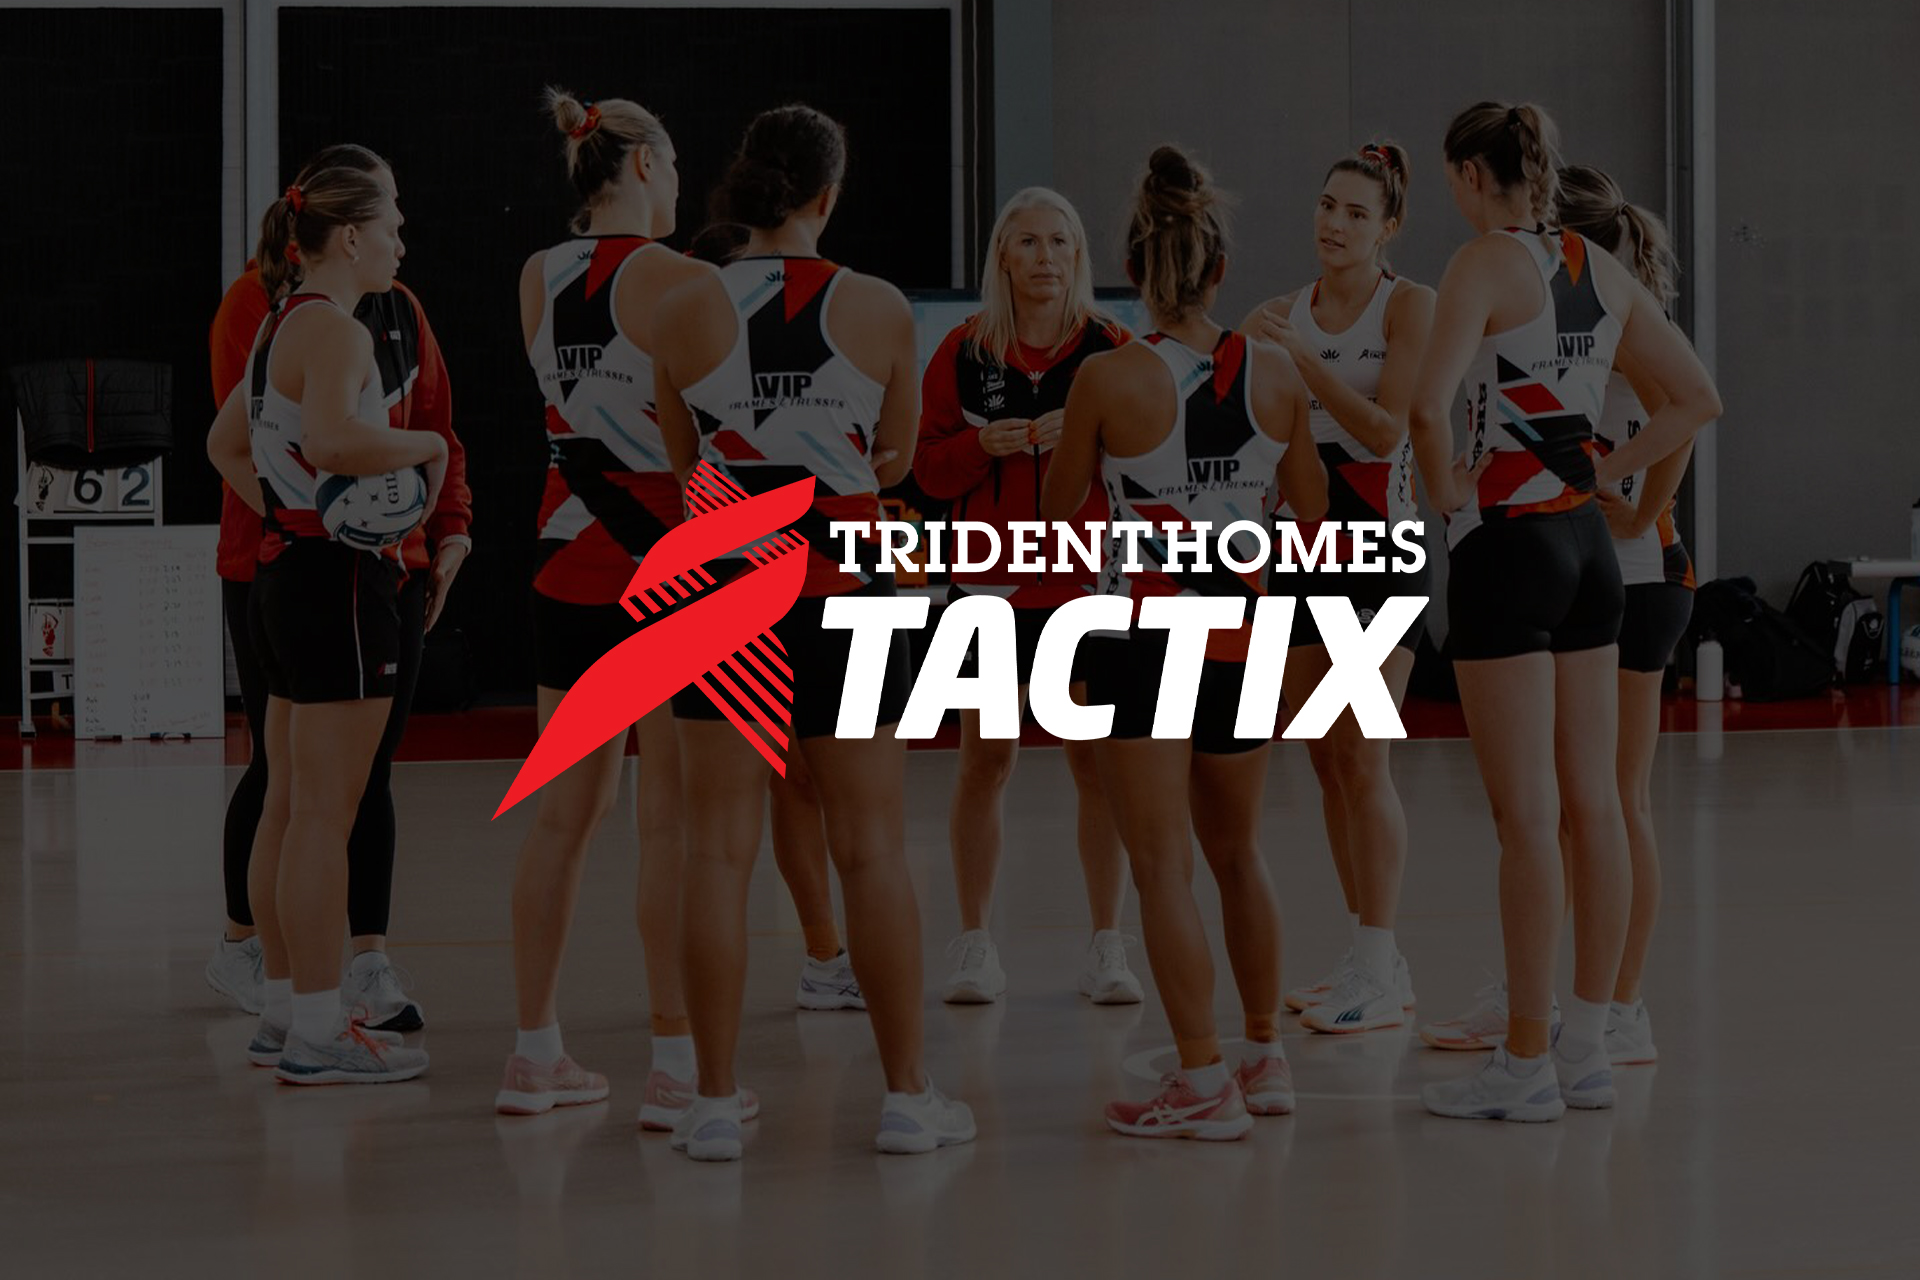 Tactix Netball Team image for VIP Frames and Trusses sponsorship section on website